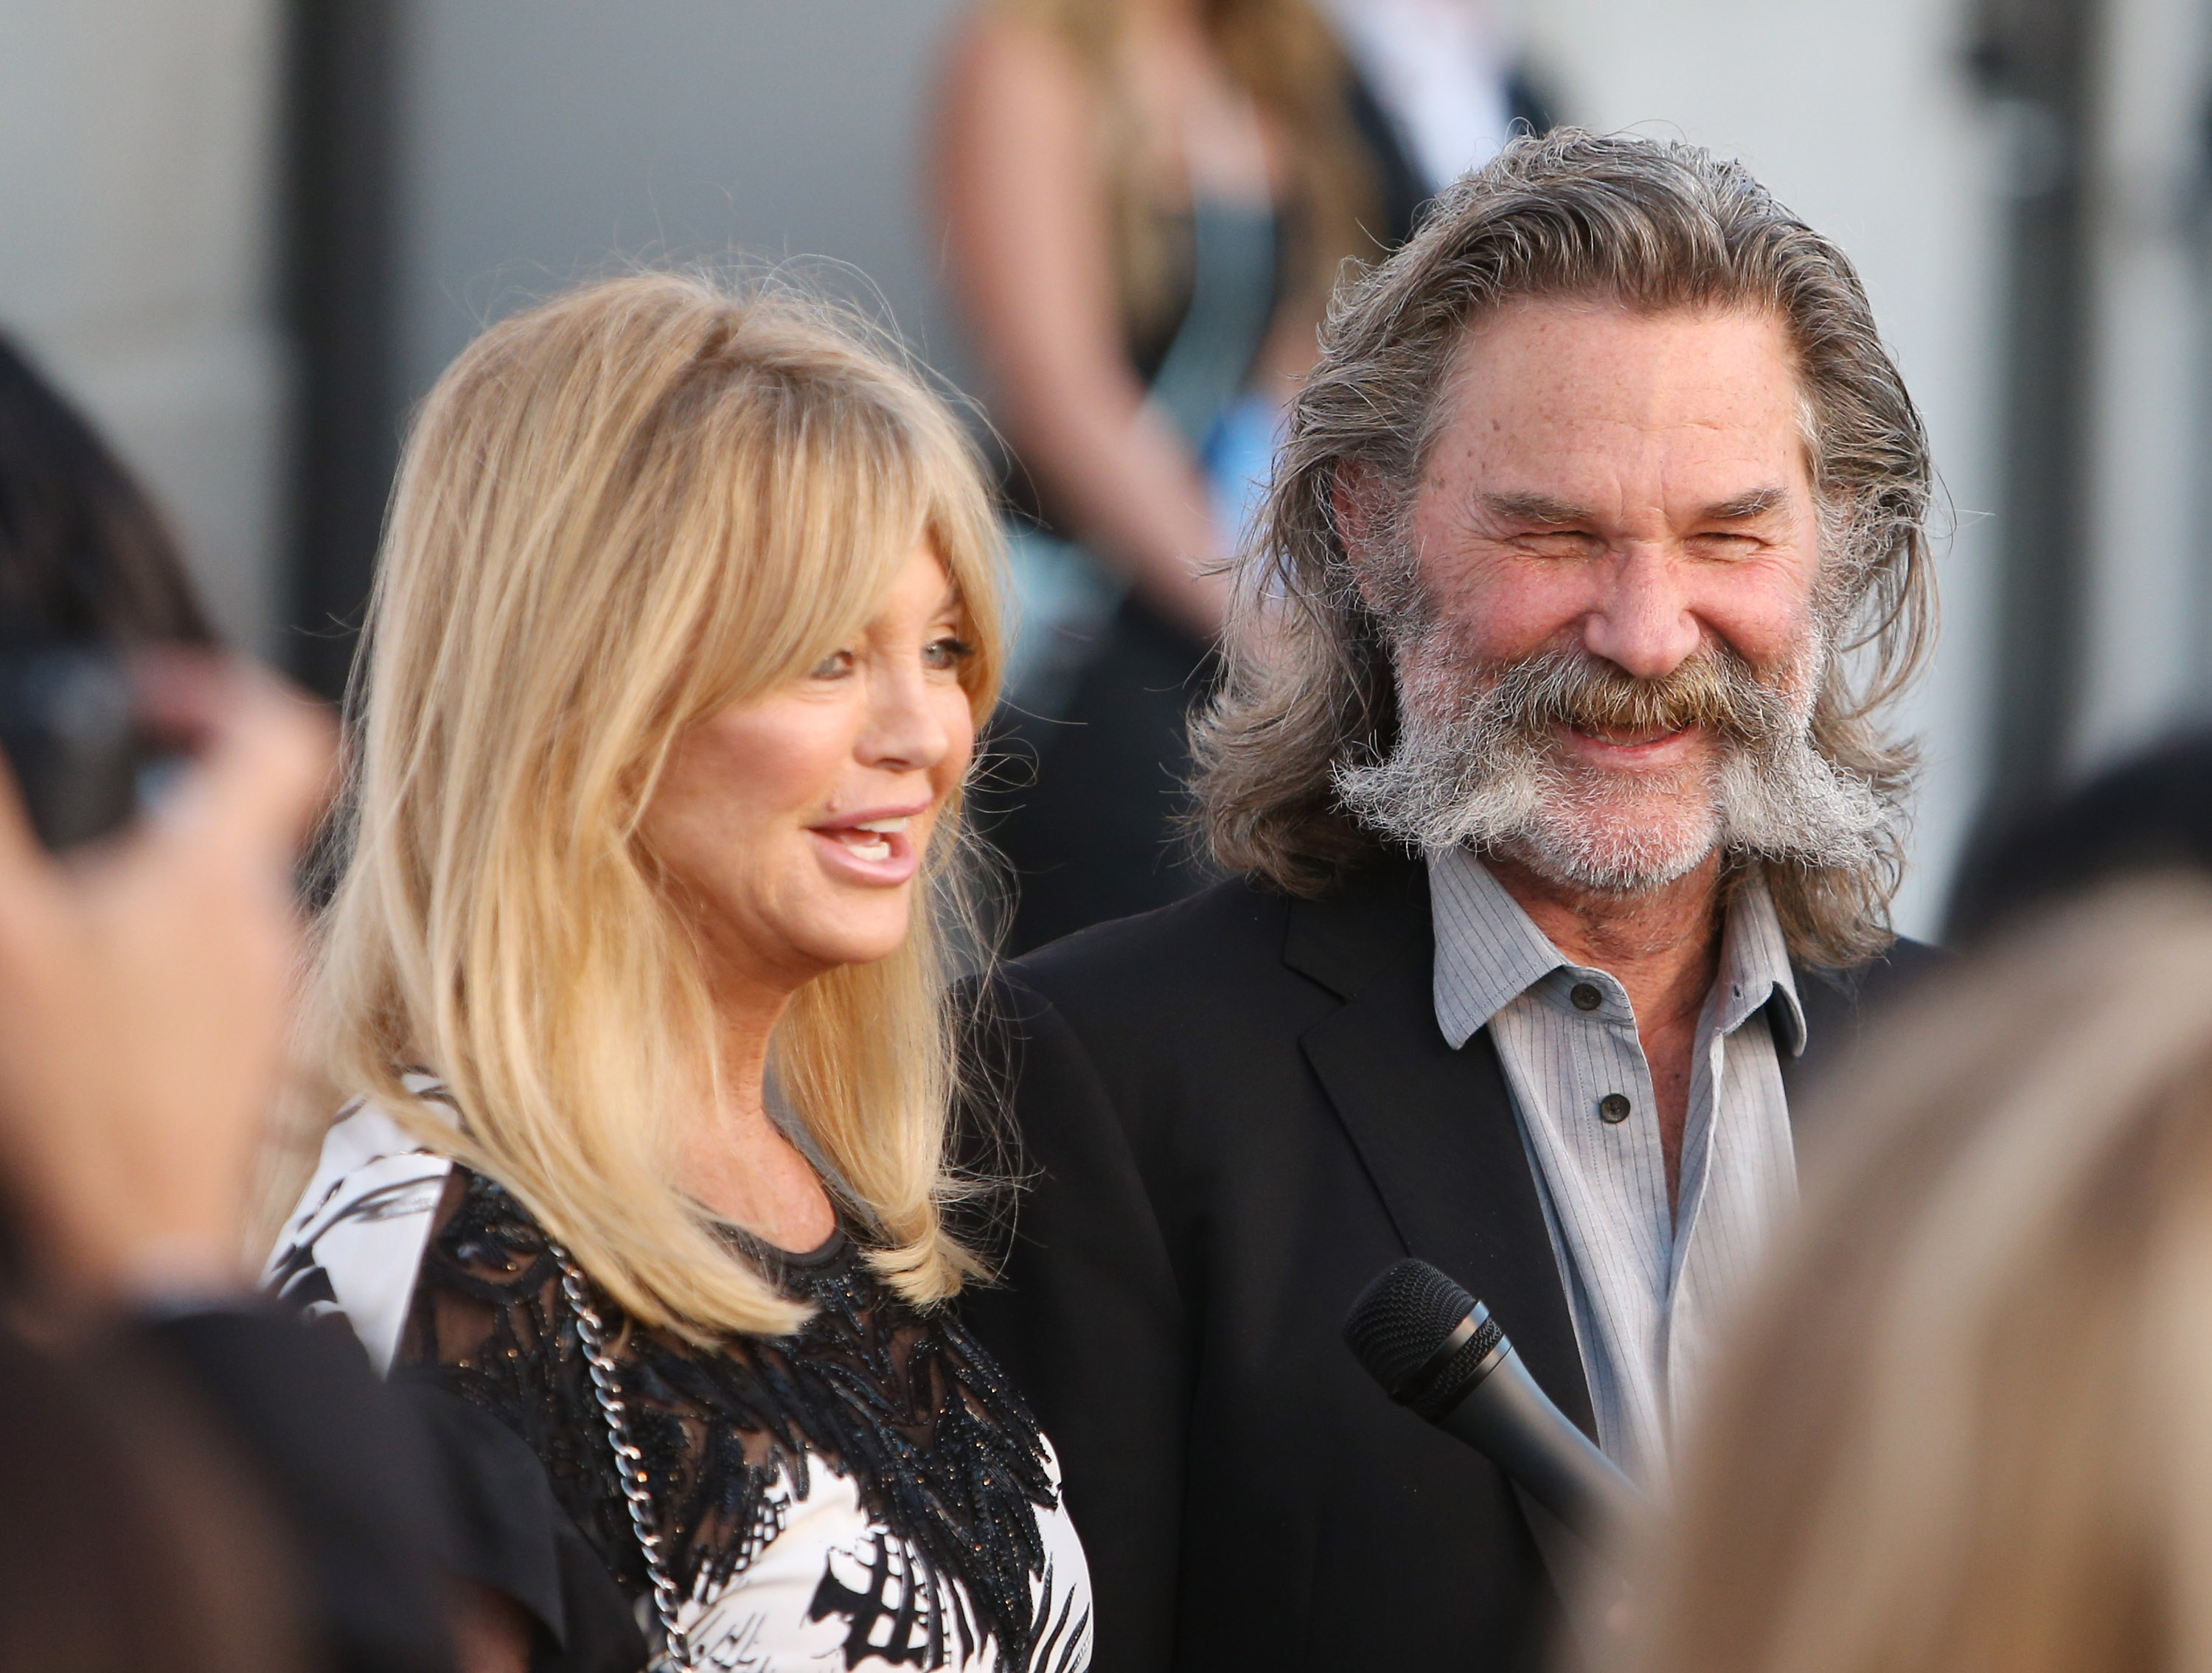 Goldie Hawn and Kurt Russell at the Mattel Children's Hospital UCLA Kaleidoscope Ball at 3LABS on May 2, 2015 in Culver City, California. l Source: Getty Images